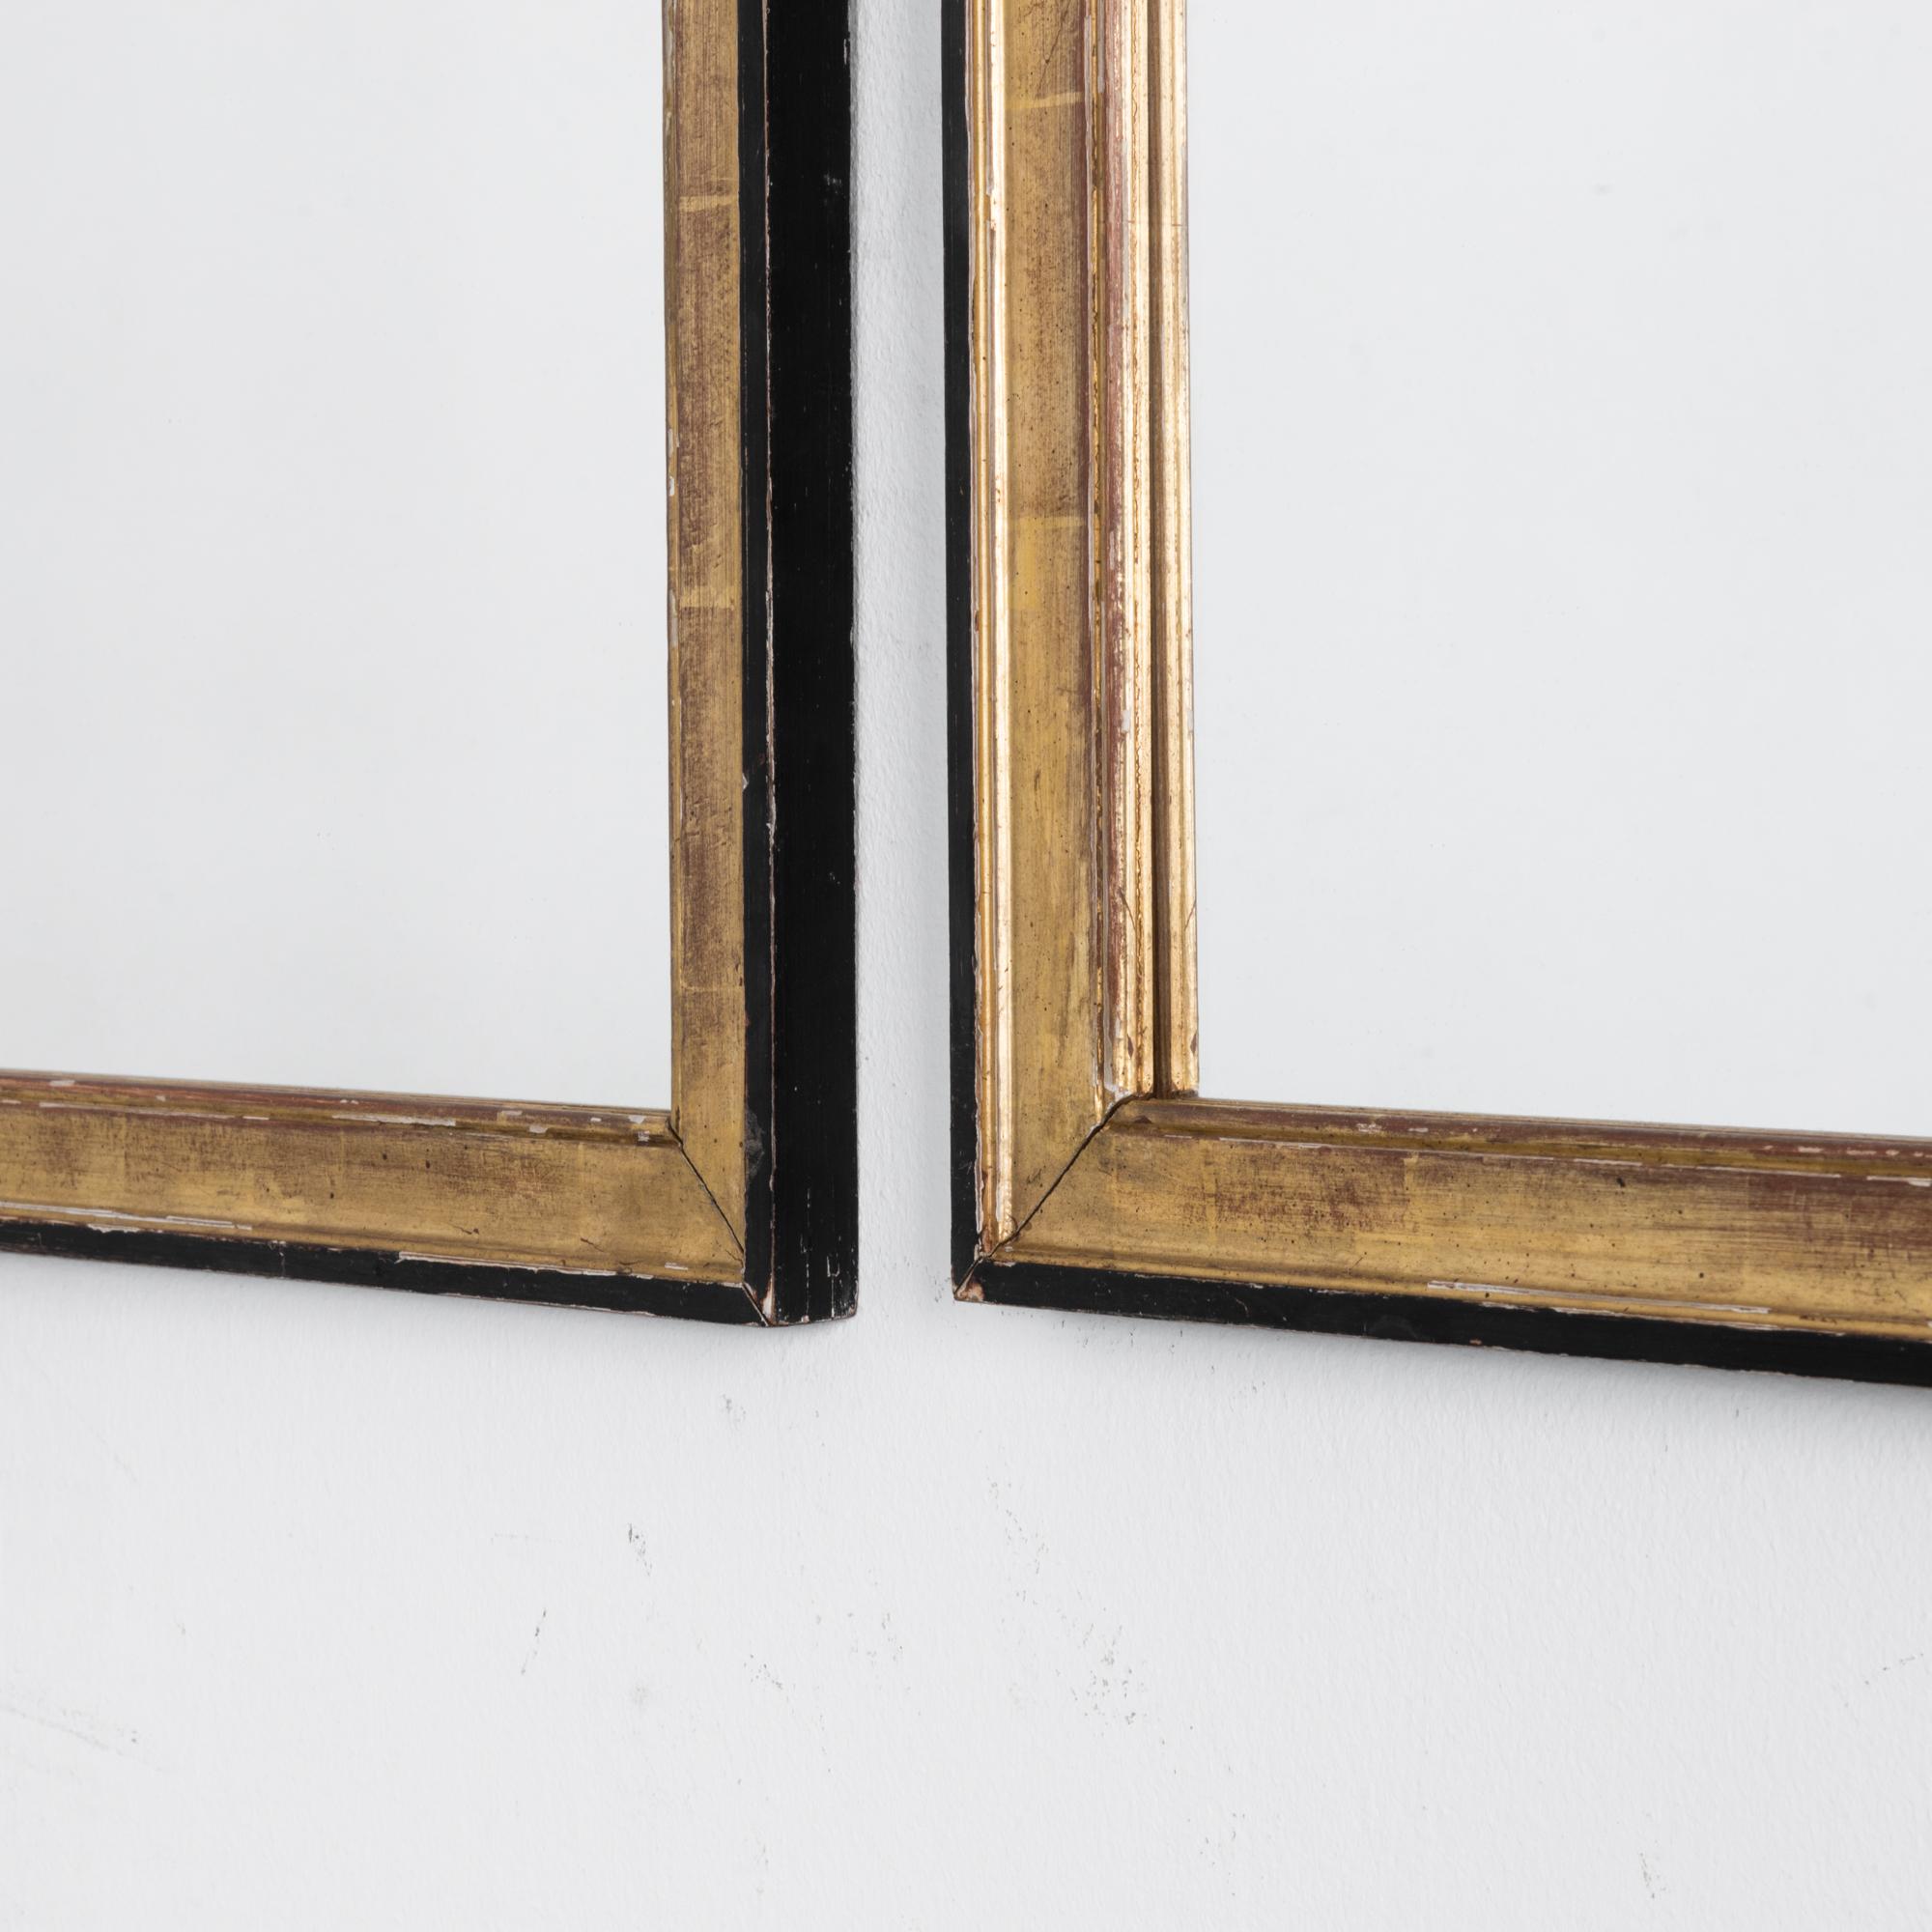 19th Century Turn of the Century French Provincial Mirrors, a Pair